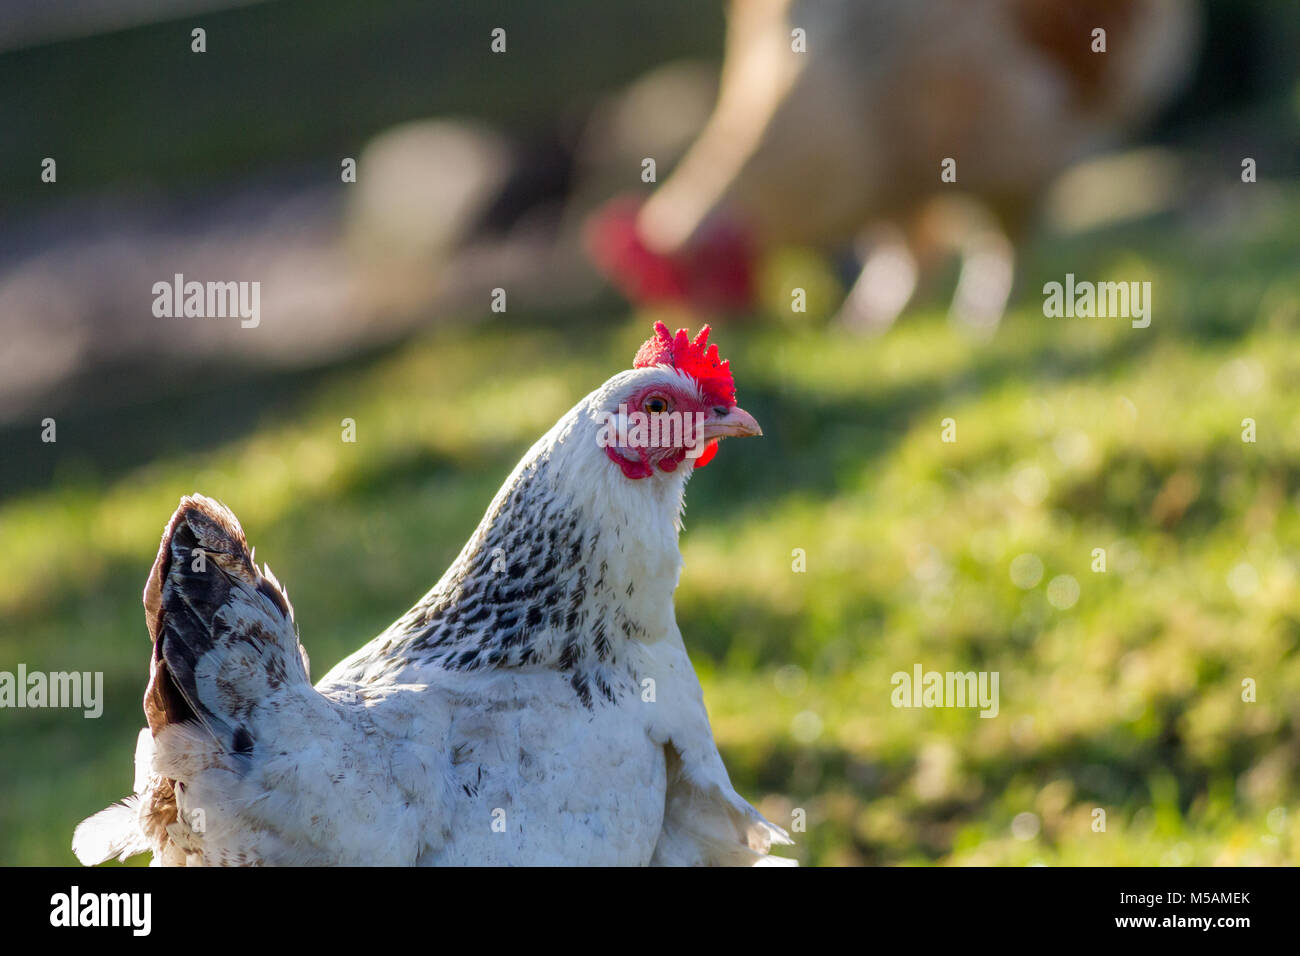 White and black leghorn chicken with red upright comb Stock Photo